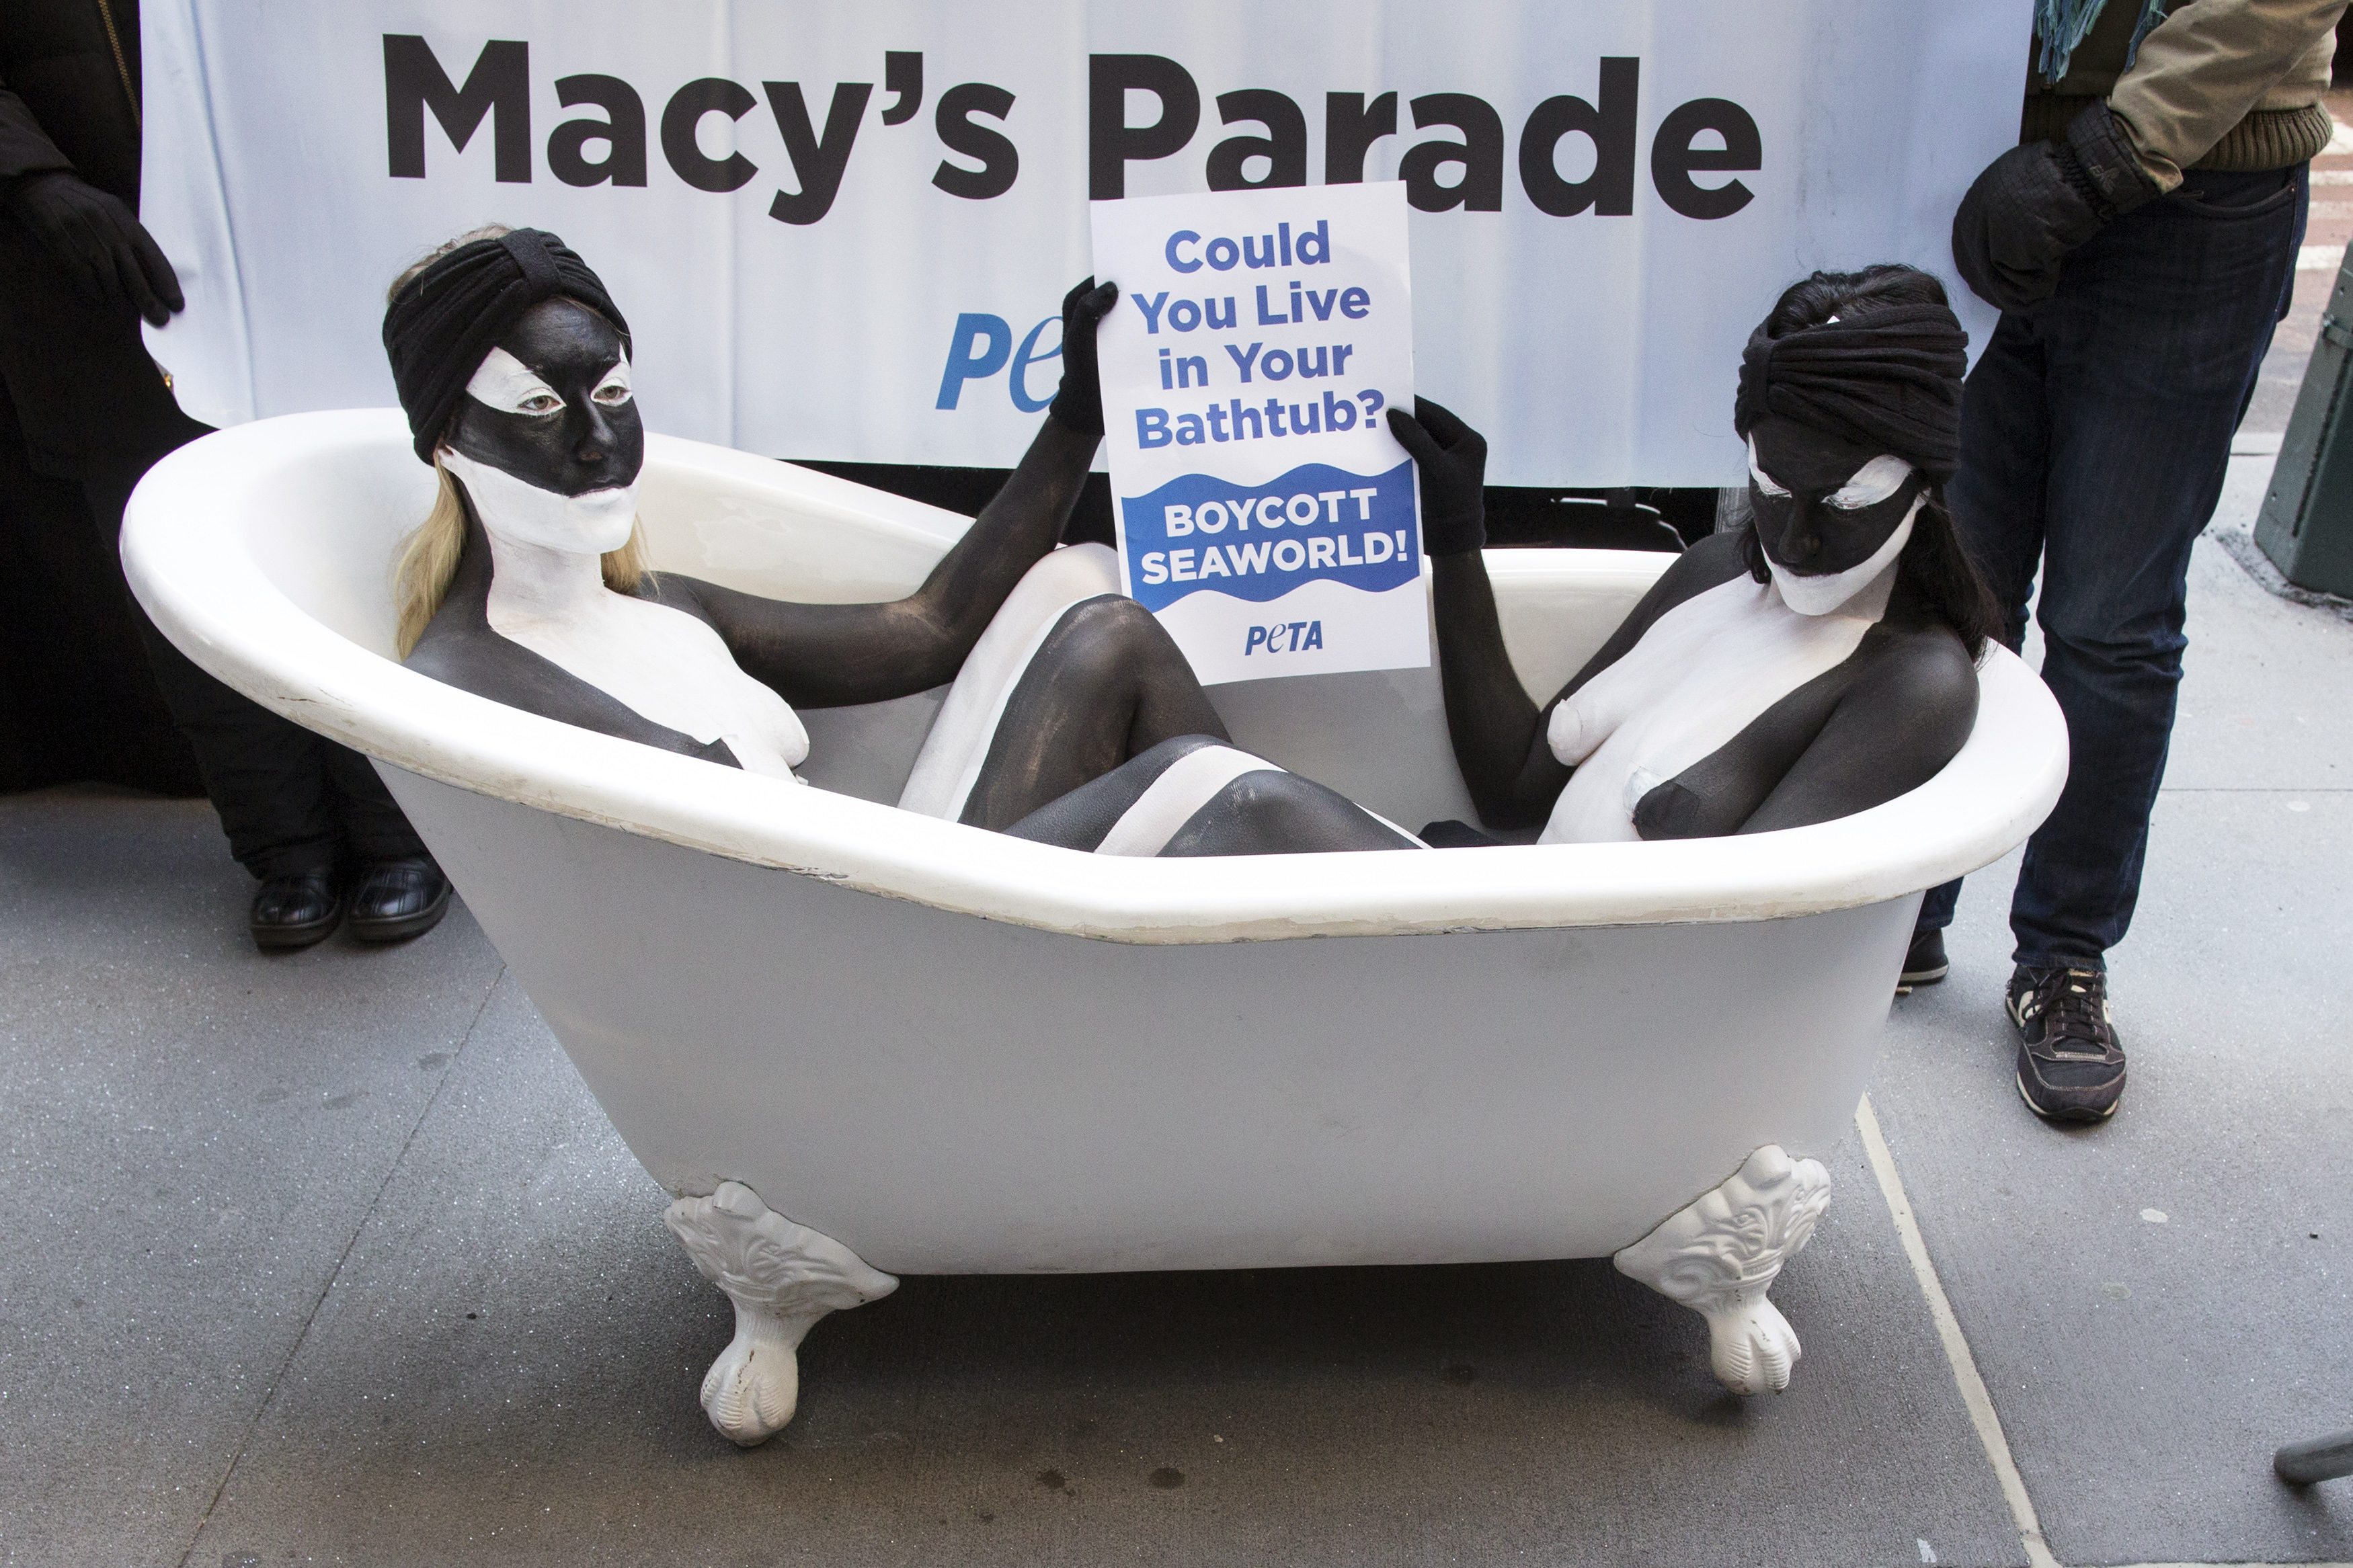 Naked protesters from the People for the Ethical Treatment of Animals (PETA) painted to resemble orca whales protest outside Macy's department store in New York, November 20, 2014. (REUTERS/Brendan McDermid)